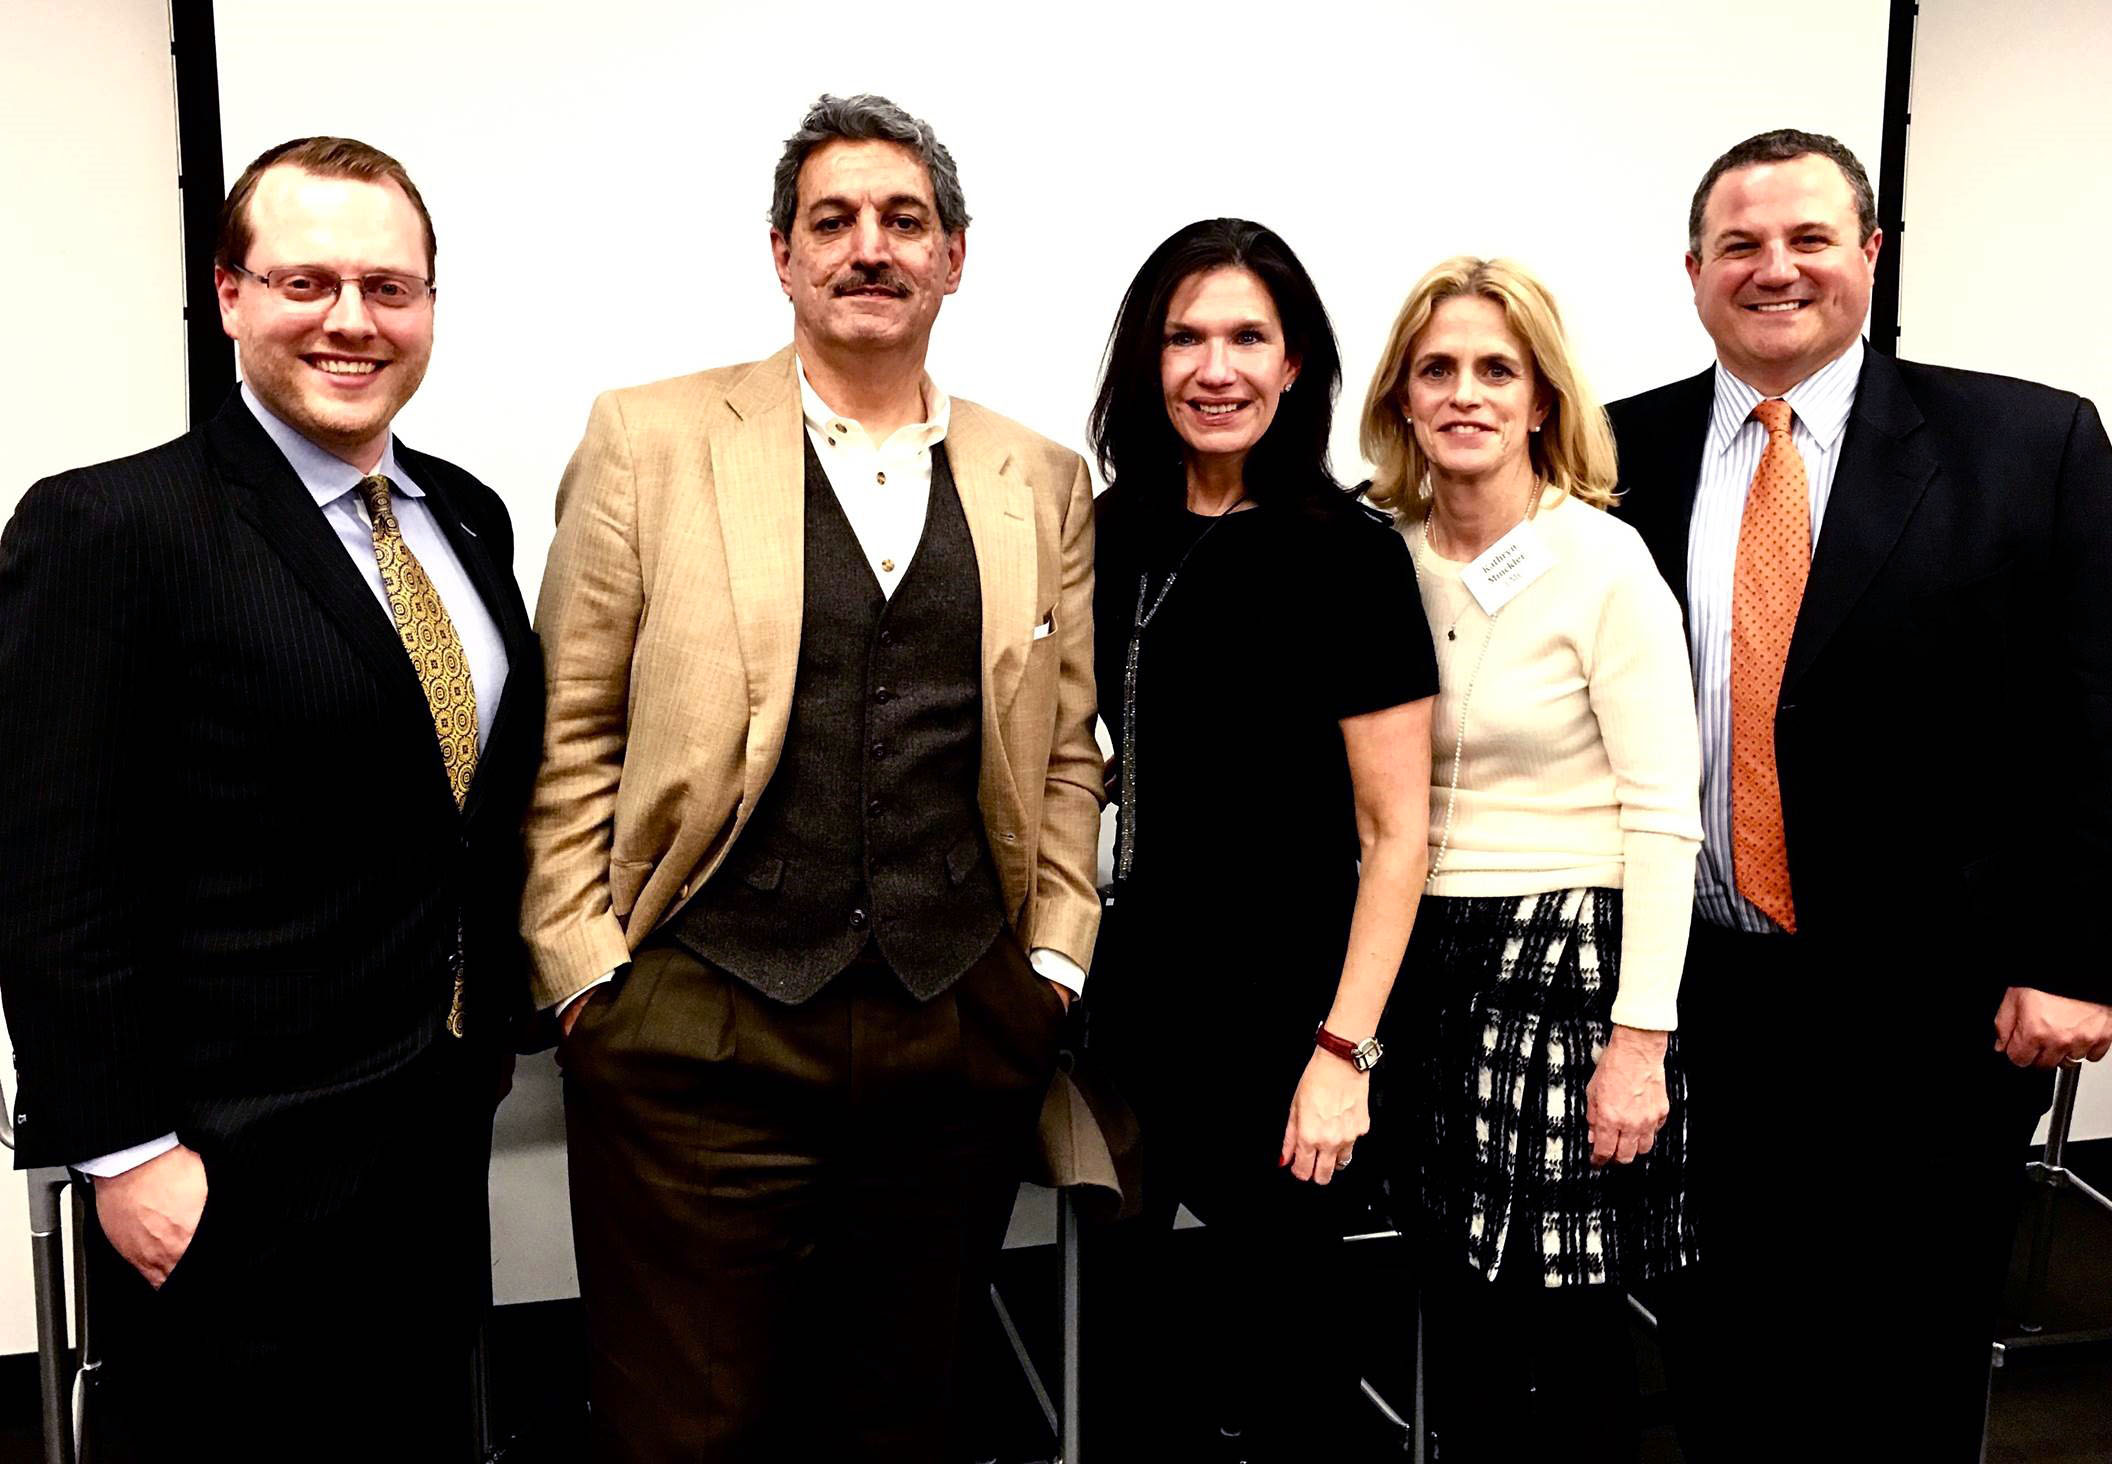 Ed Delia - Featured Panelist at the Luxury Marketing Council meeting in NY